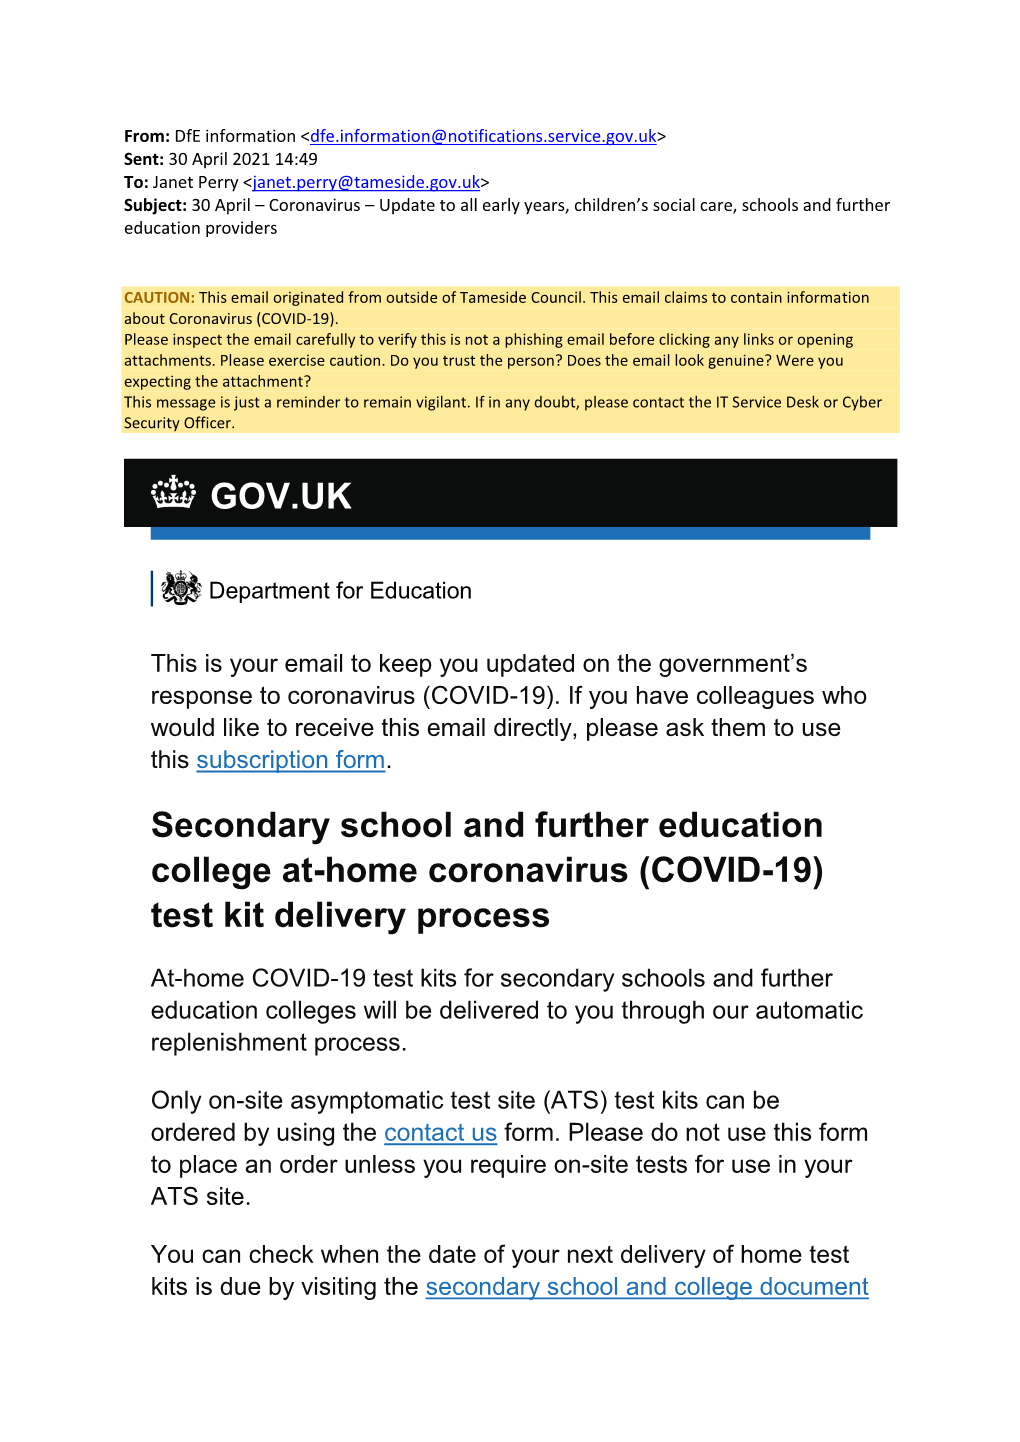 Department for Education COVID-19 Helpline